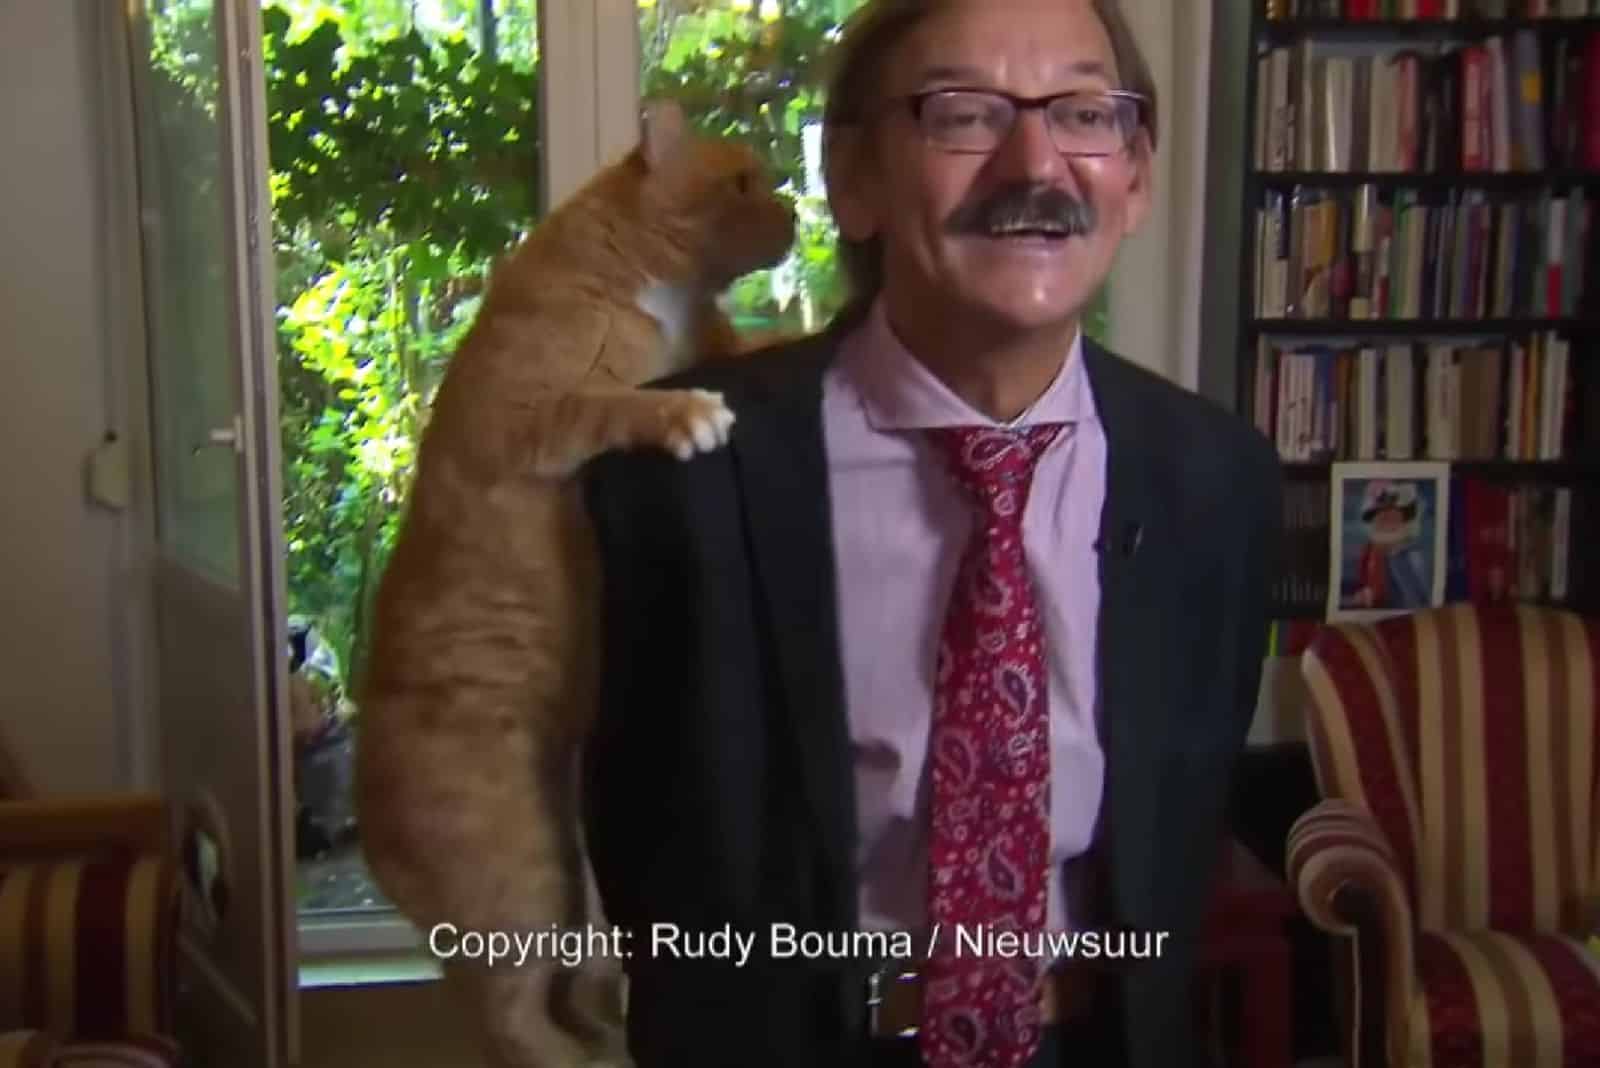 the cat climbed onto the man's shoulder